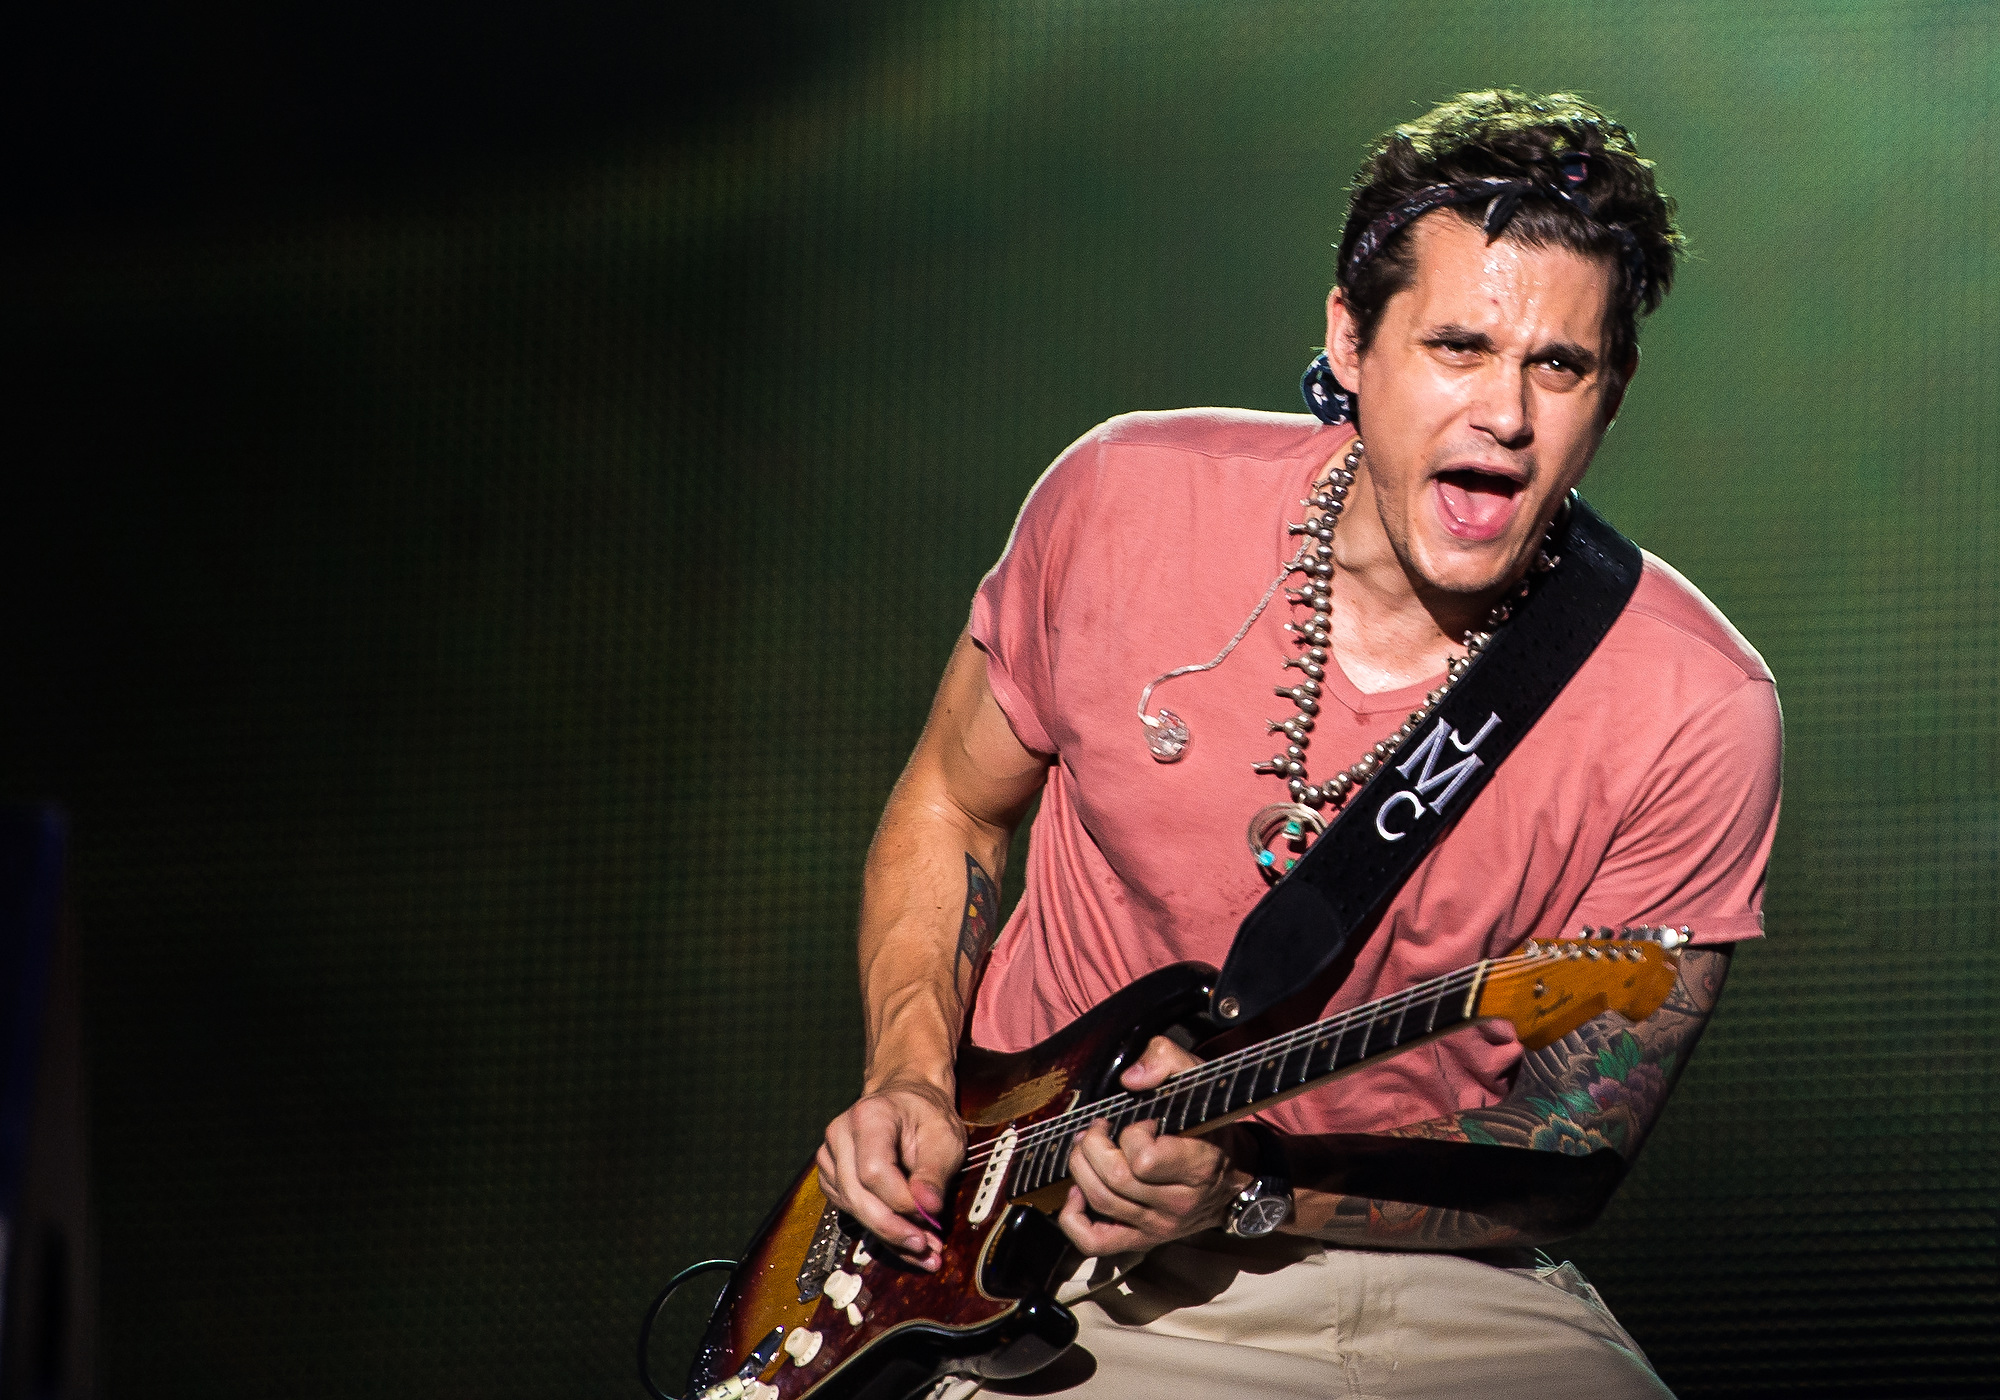 Celebrity Smitsom det er alt Born and Raised: 10 things you may not know about John Mayer